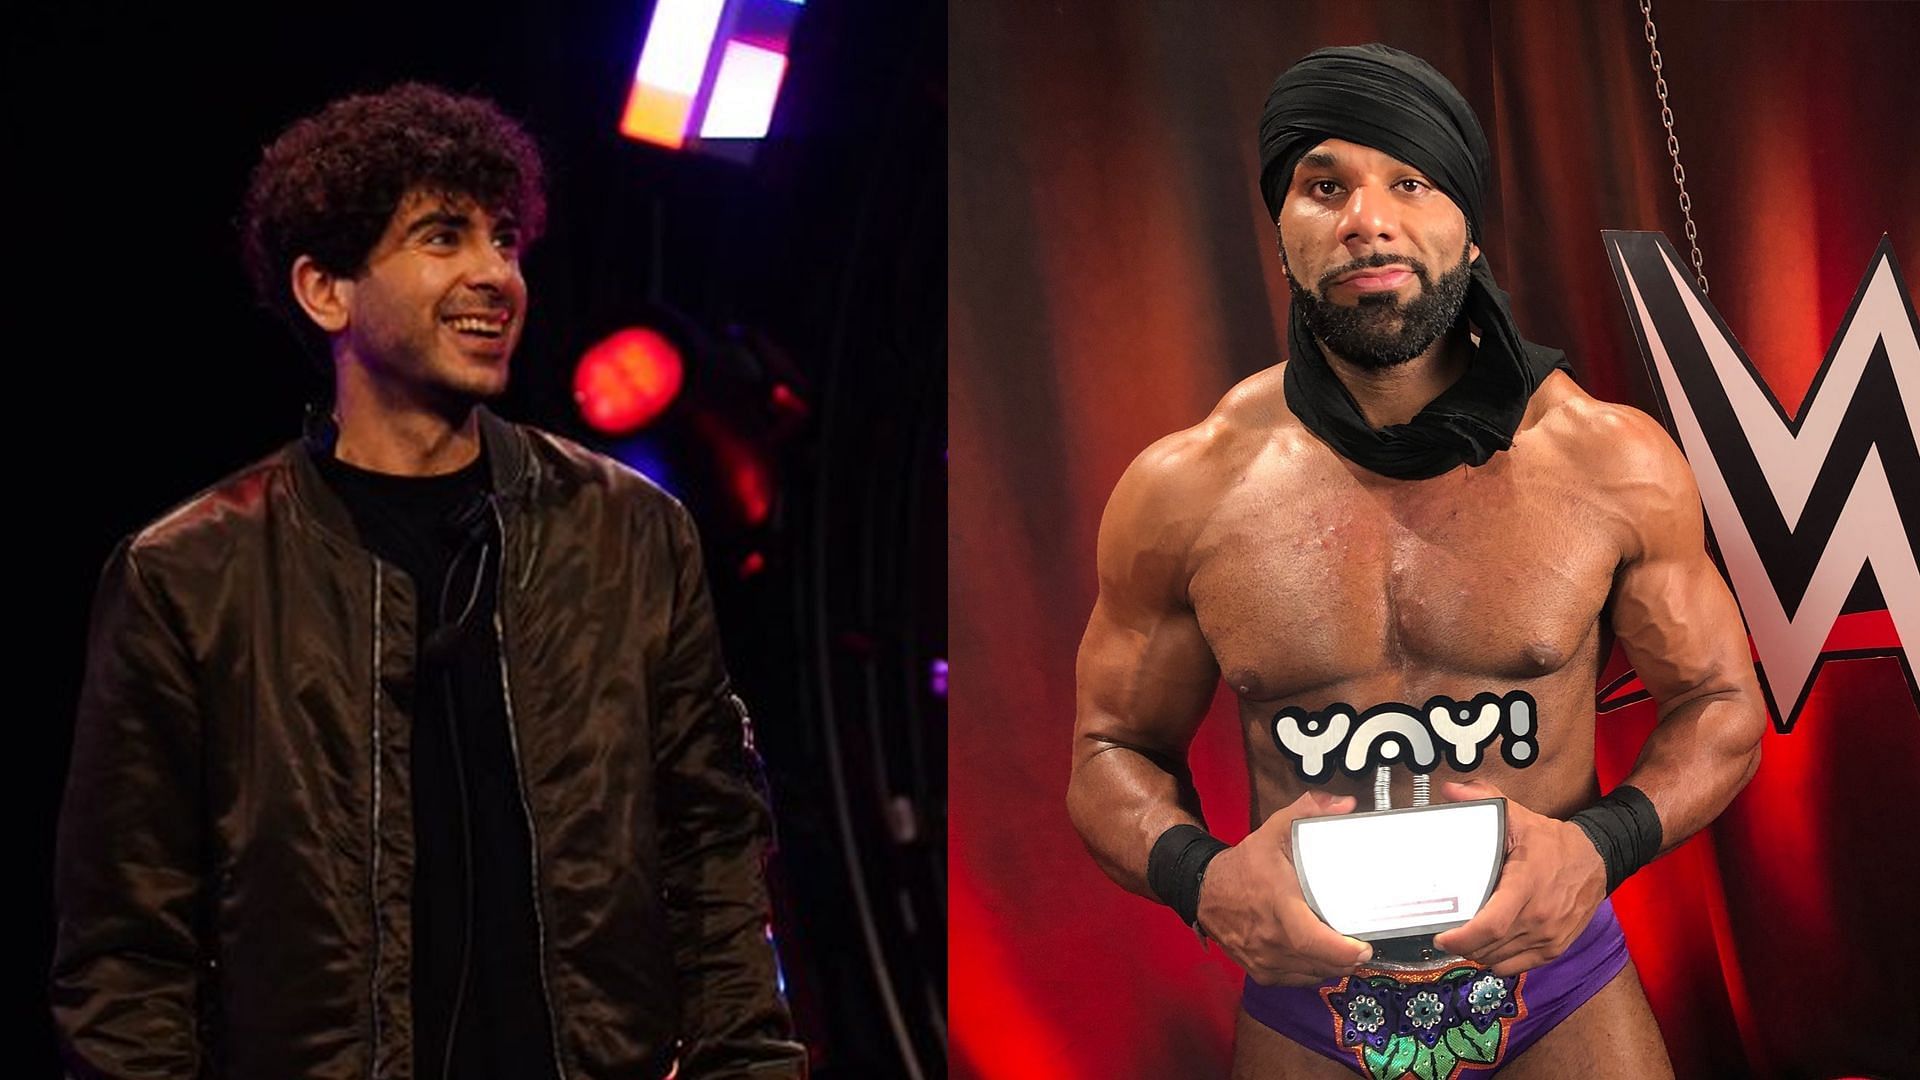 Tony Khan and Jinder Mahal were involved in a recent social media exchange